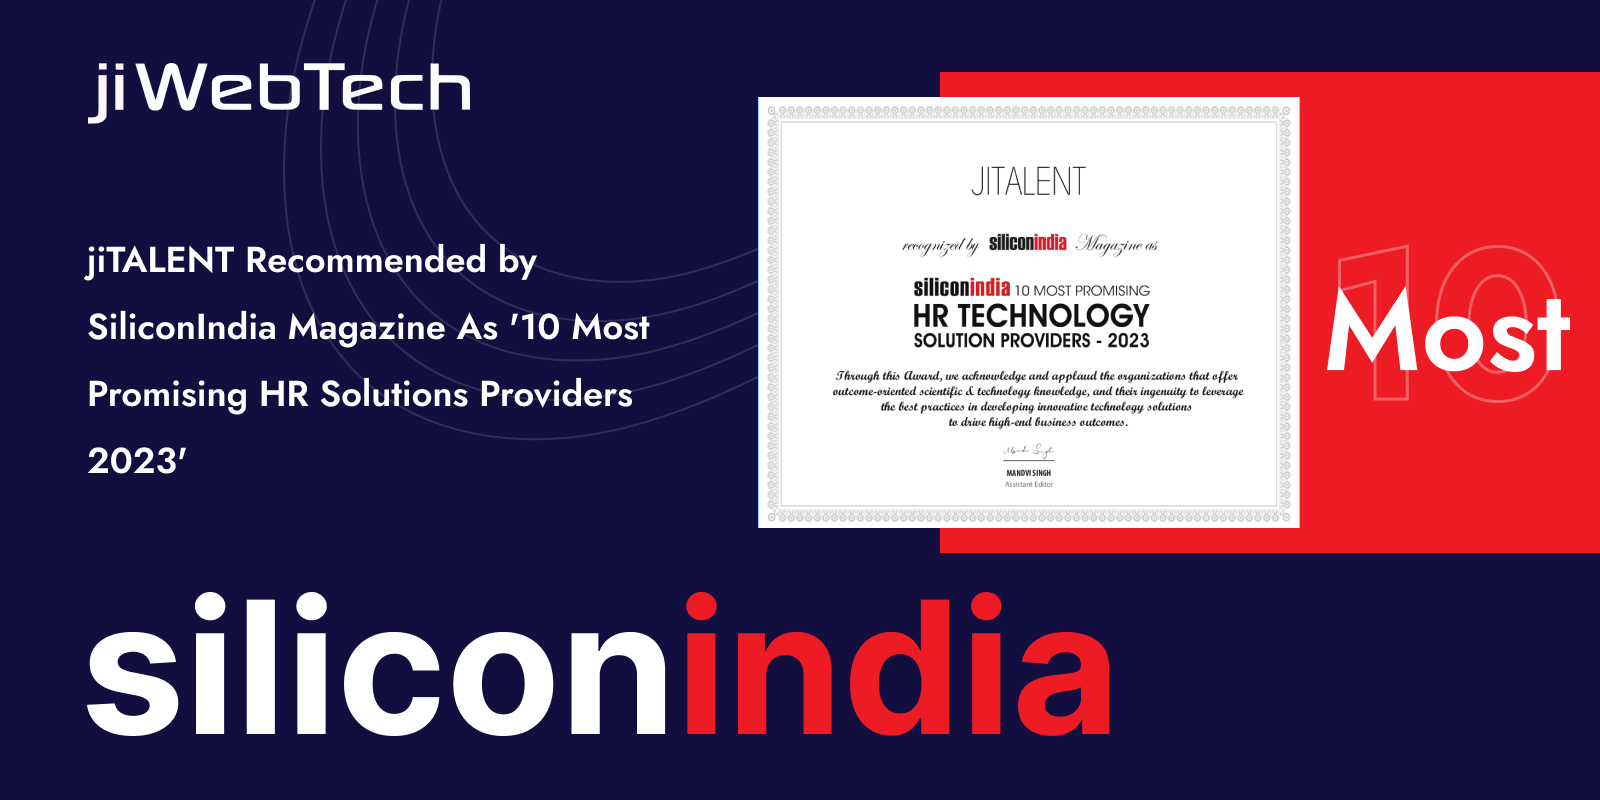 jiTALENT Recommended By SiliconIndia Magazine As '10 Most Promising HR Solutions Providers 2023'